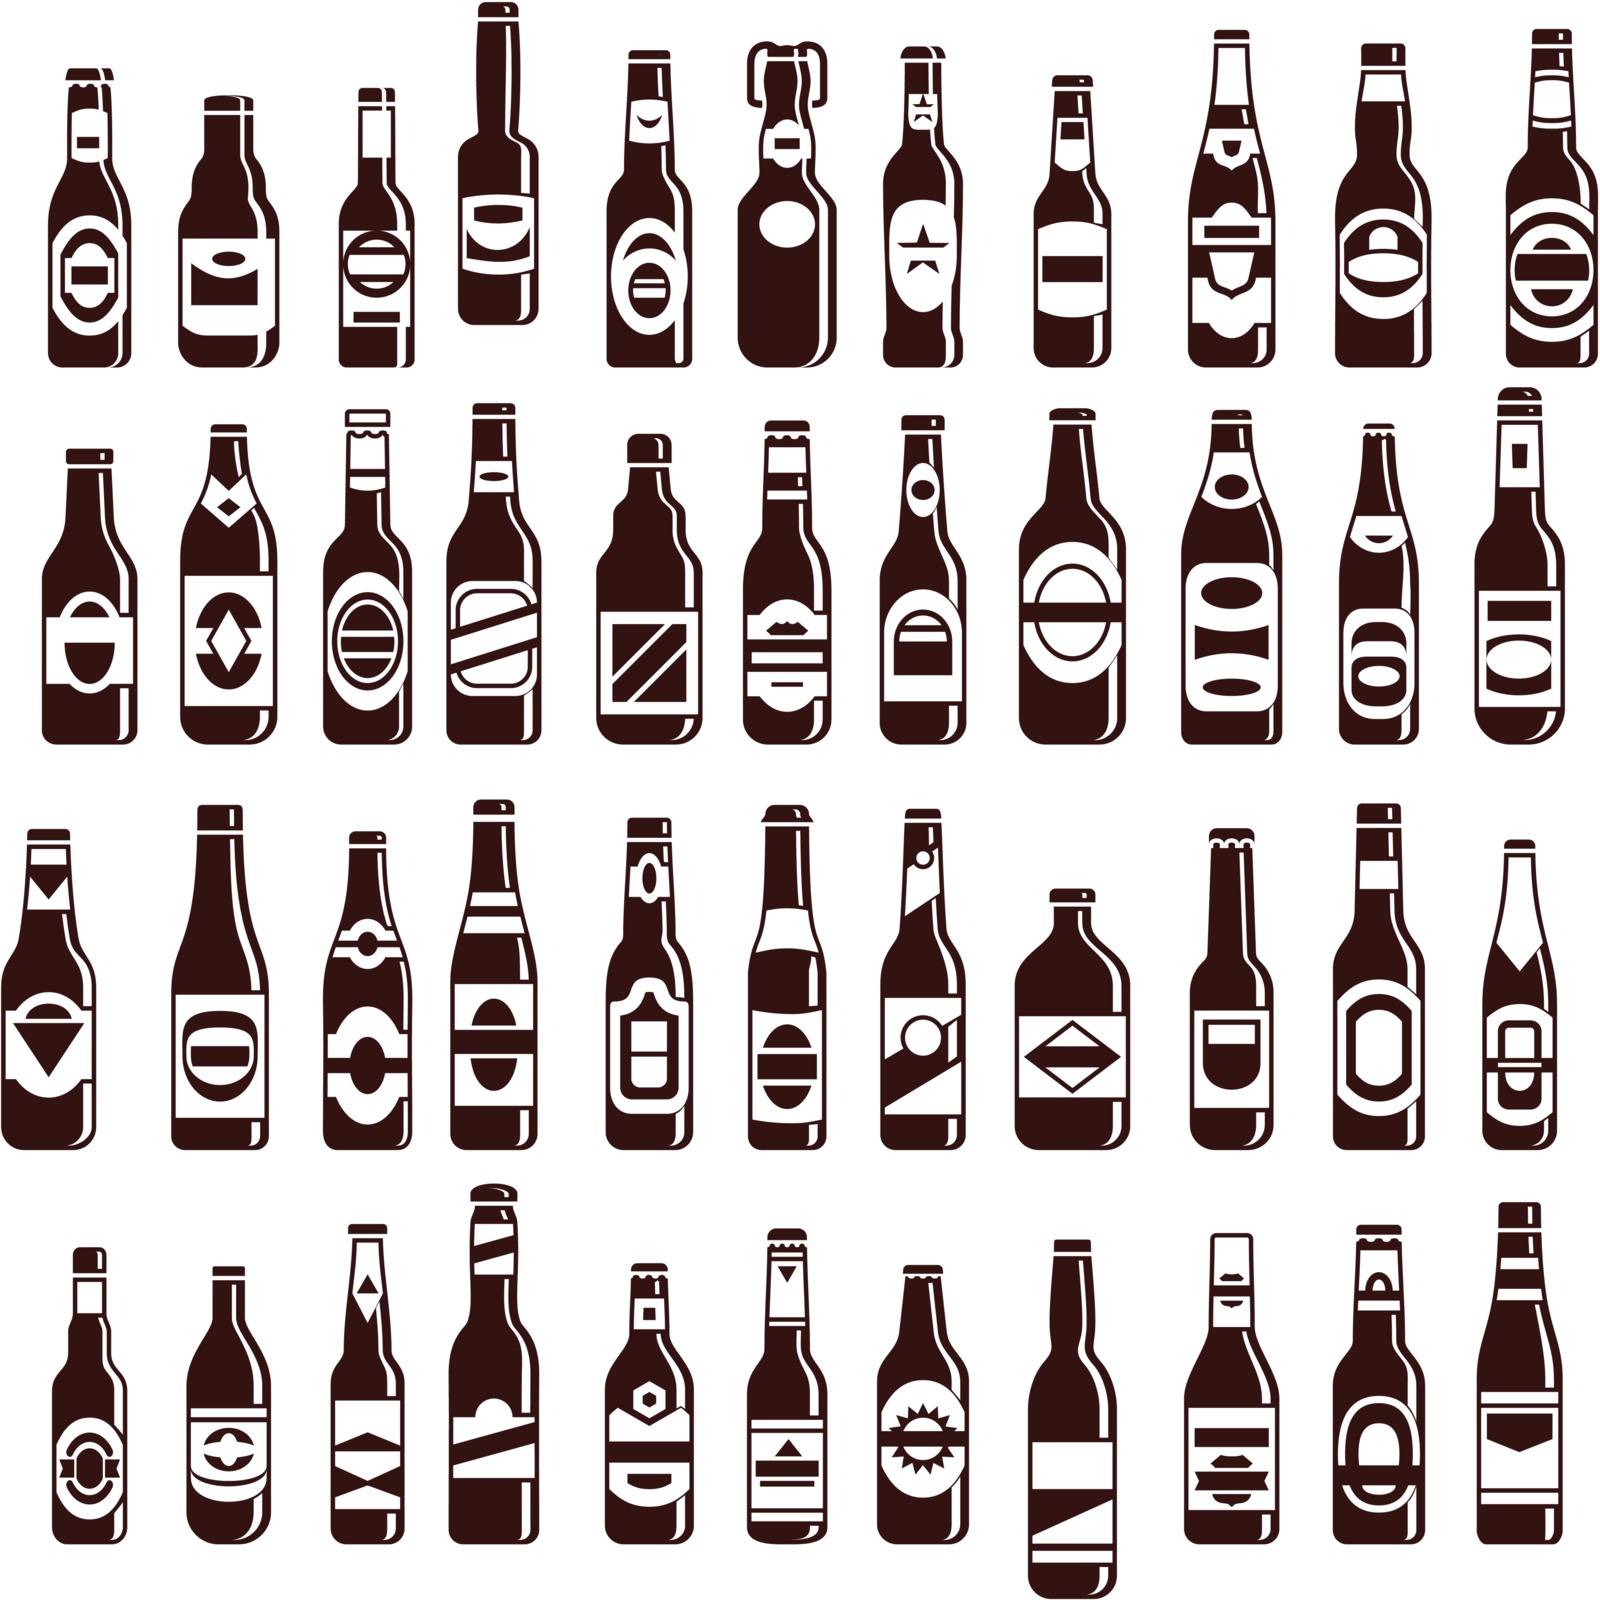 Beer elements by kartyl